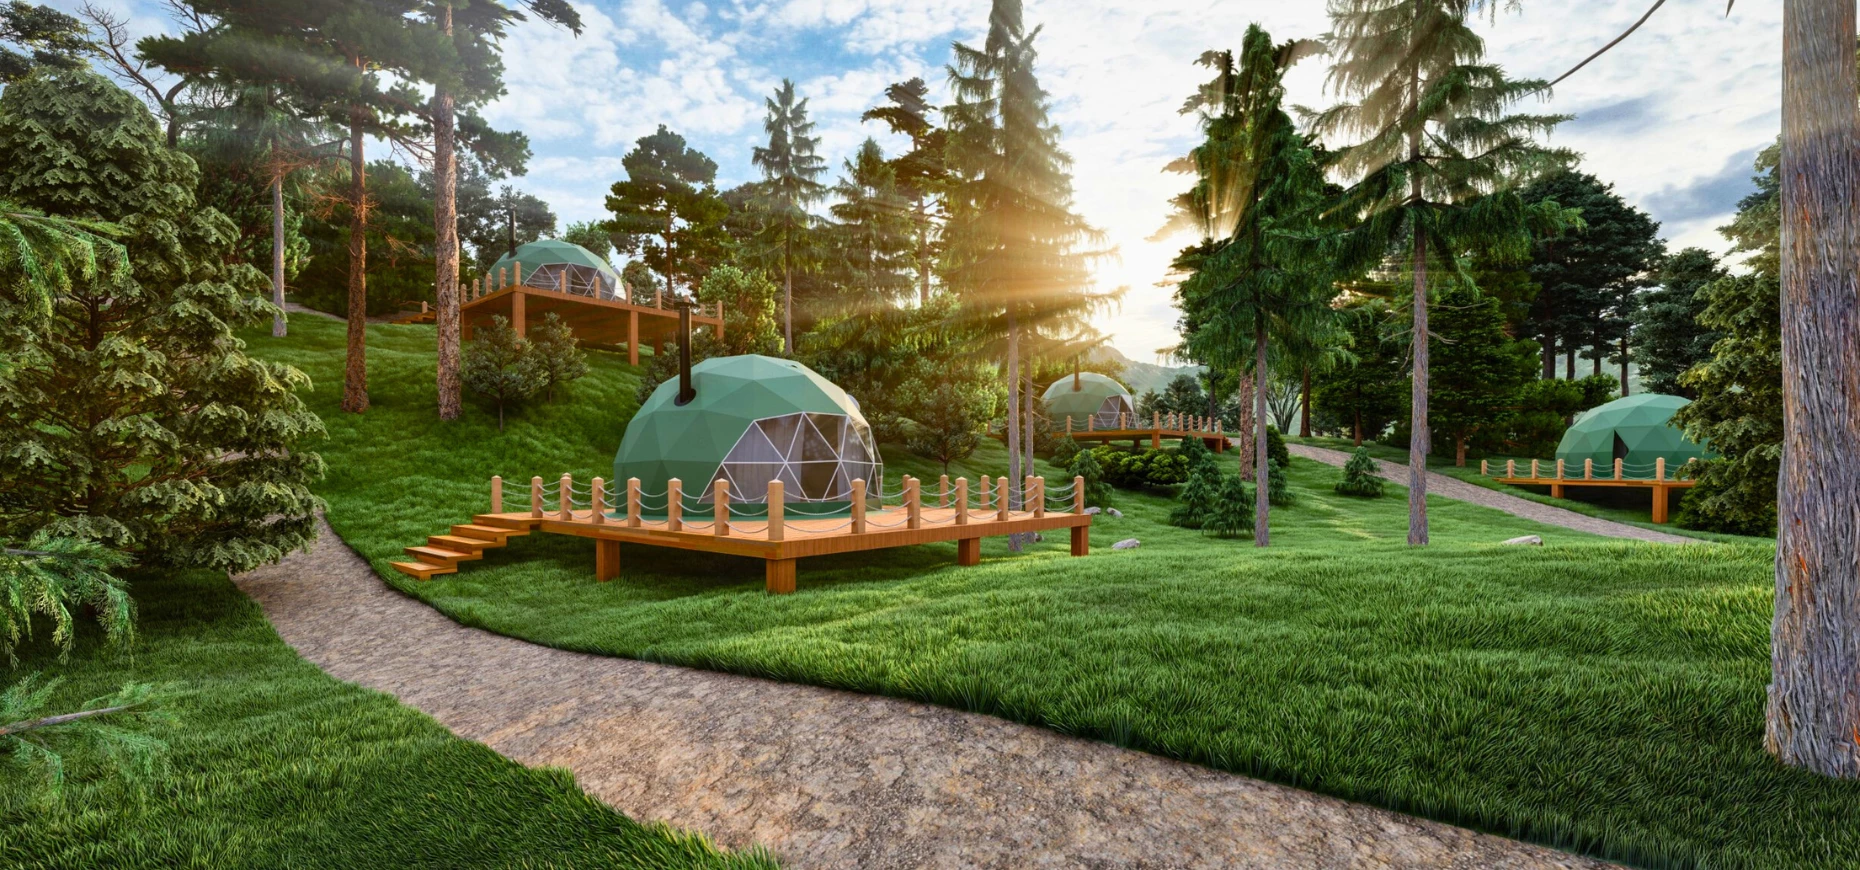 A CGI mock-up of what the Mythtopia 'glamping' site could look like.